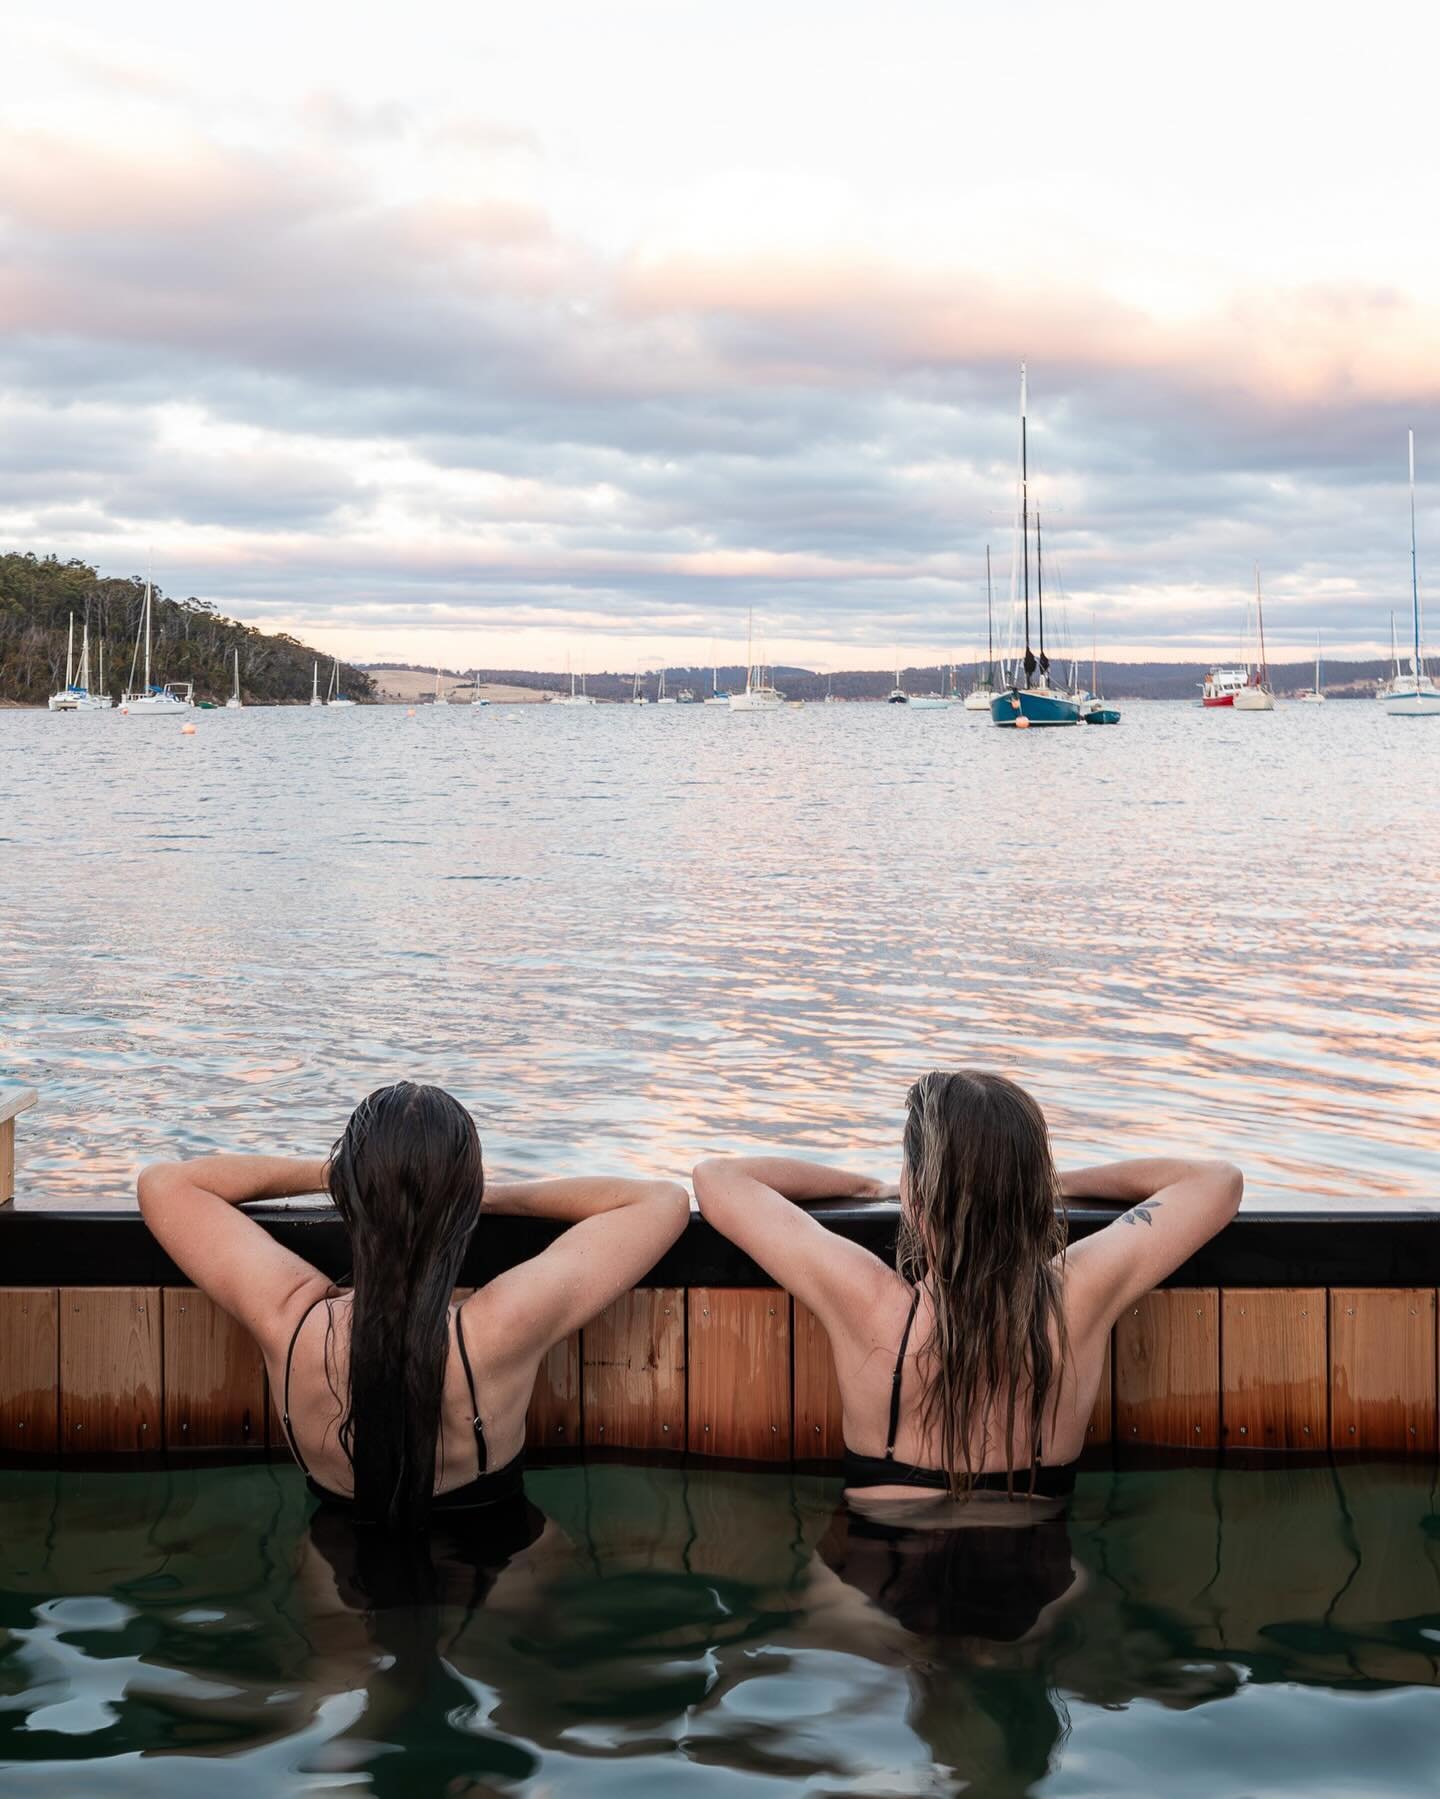 We had an amazing opening weekend, and couldn&rsquo;t have asked for a better bunch of people to share the sauna boat with 🖤

Dolphins, Aurora Australis, laughs, cold plunges and steam made up the most memorable weekend. We can&rsquo;t wait to do it